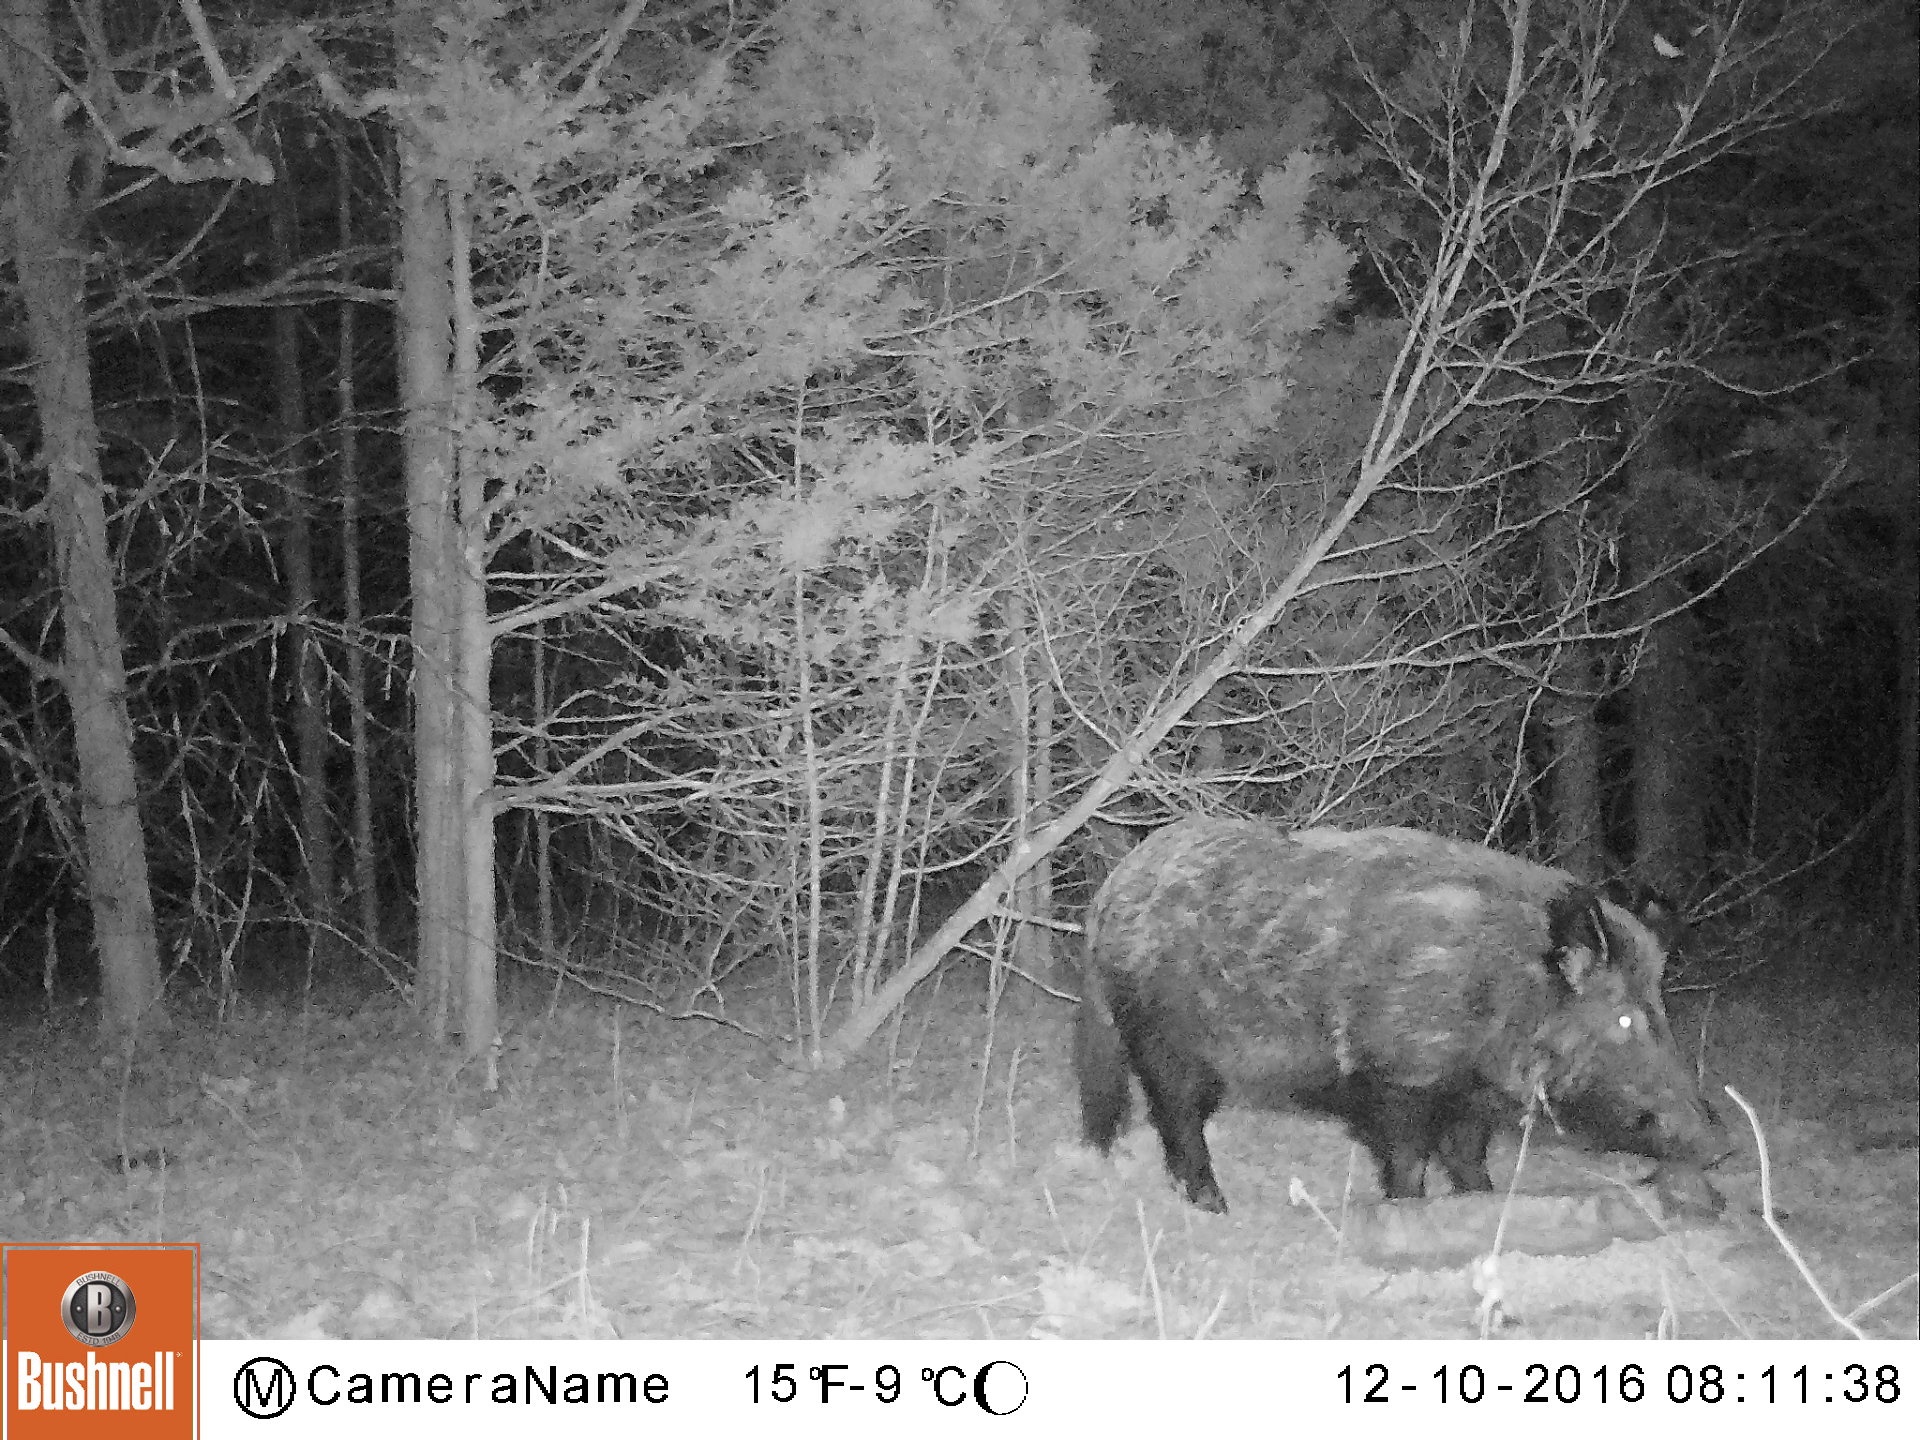 This large, Shannon County feral hog returns to the same bait pile often and will hopefully be trapped soon.